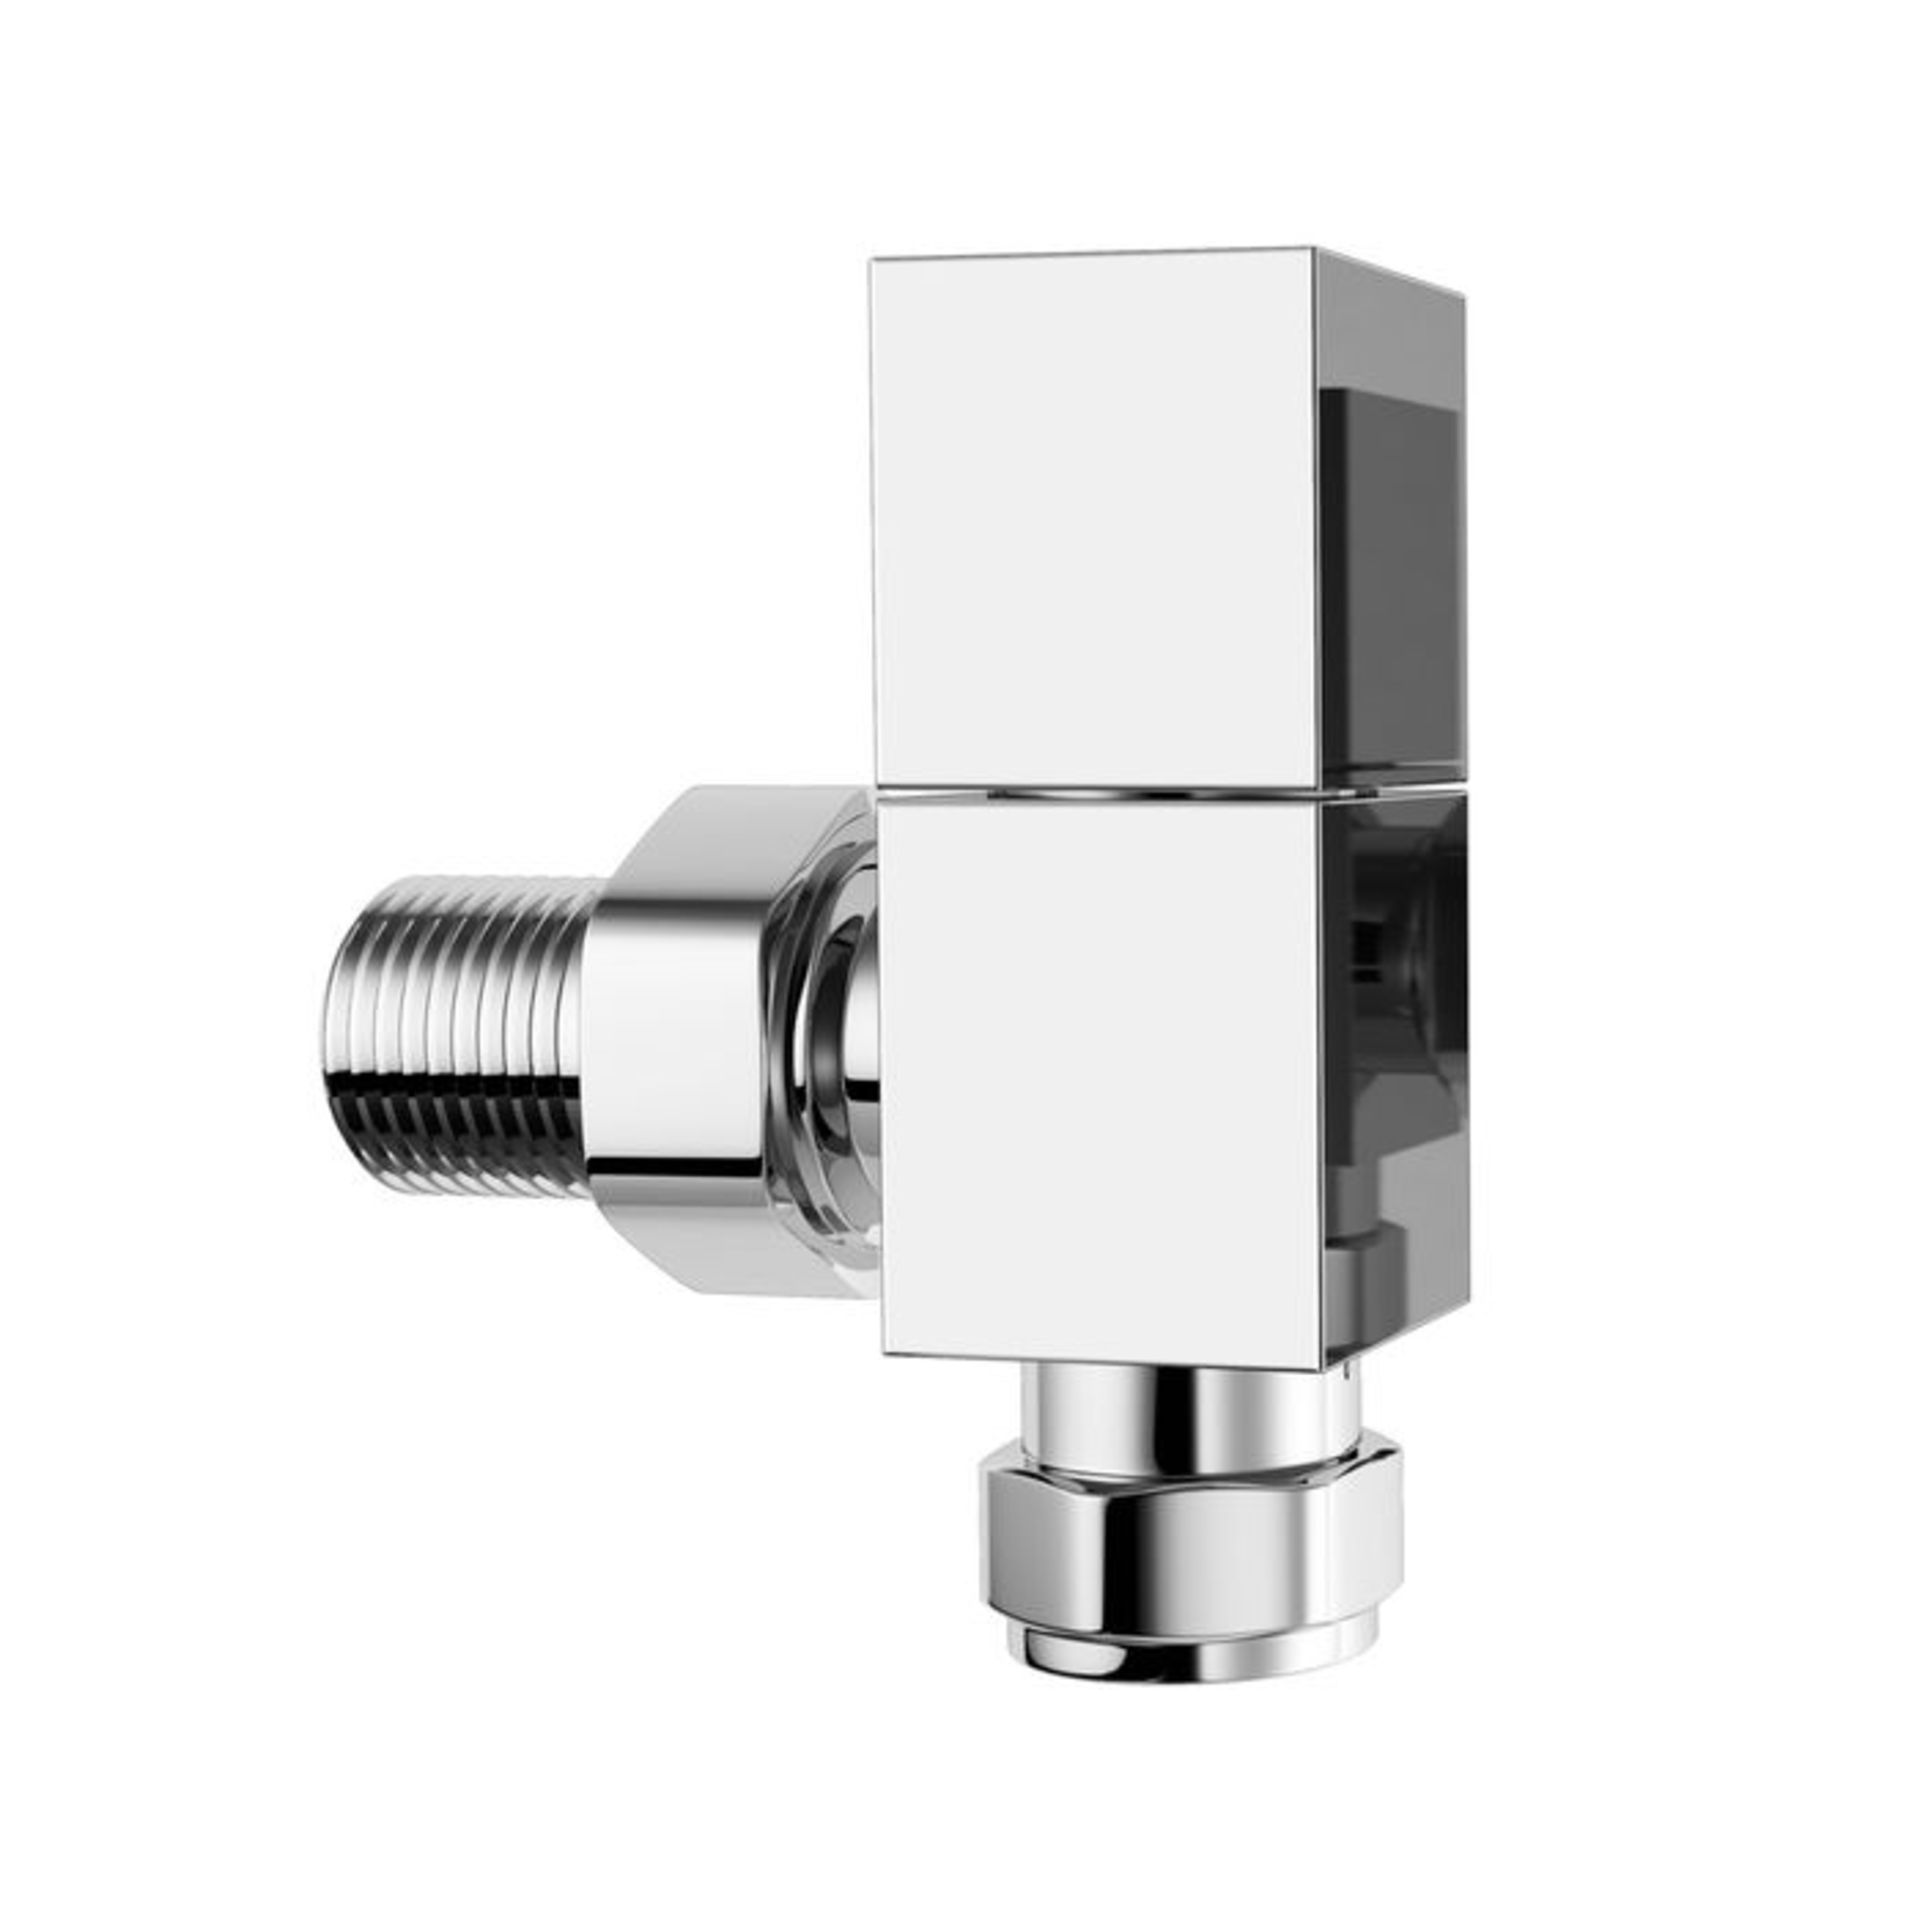 (S147) 15mm Standard Connection Square Angled Chrome Radiator Valves Accreditation & Testing 100%